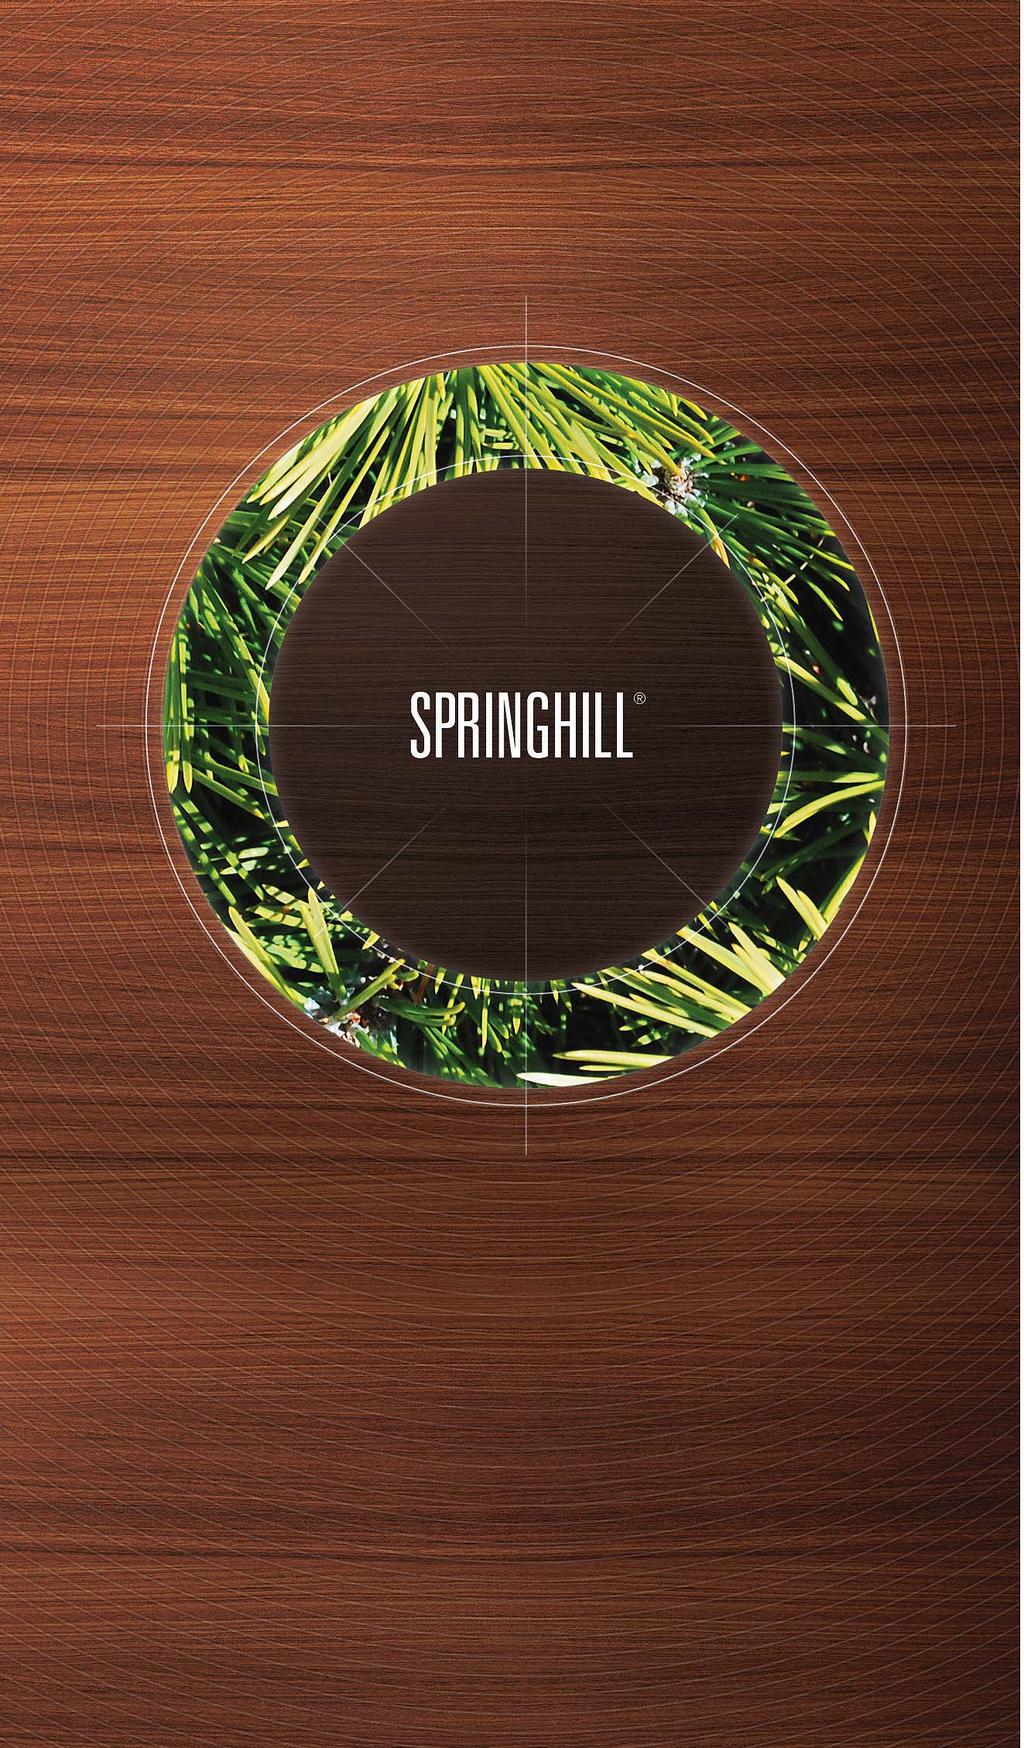 Springhill Uncoated Bristols The thrill of Springhill. Press performance. Print performance. Environmental performance.